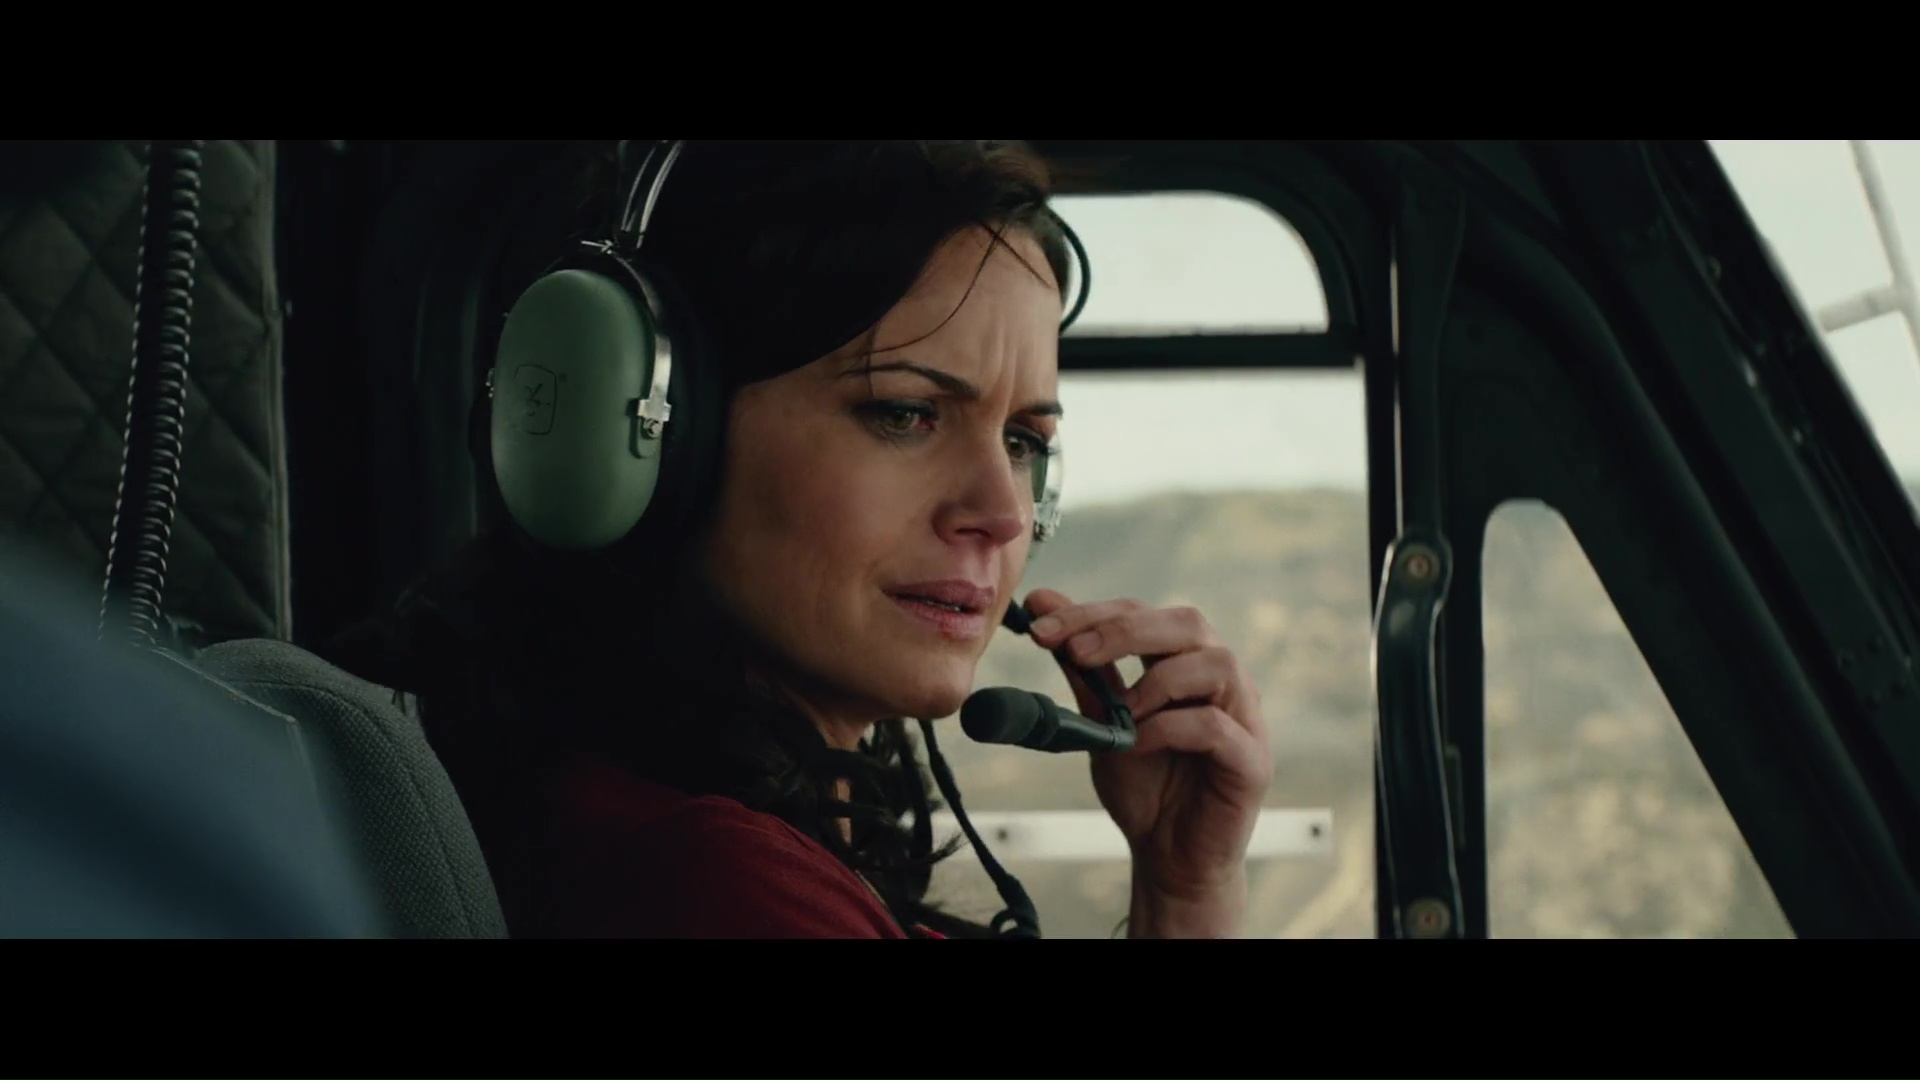 San Andreas 1080p Lat-Cast-Ing 5.1 (2015) Ppf8WV7F_o